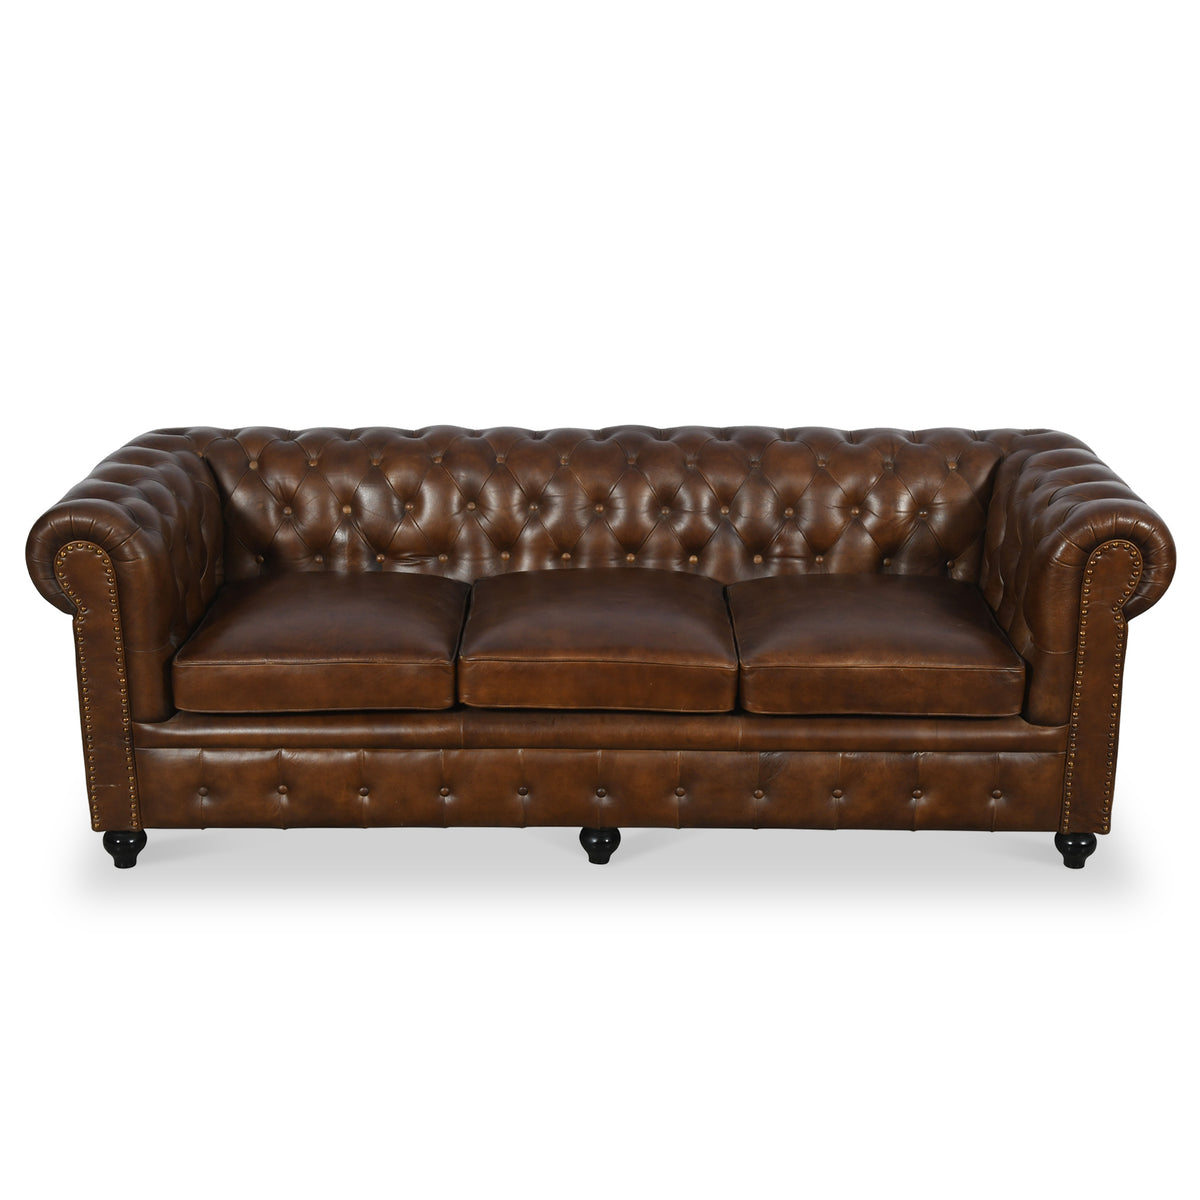 Nina Leather Chesterfield 3 Seat Sofa from Roseland